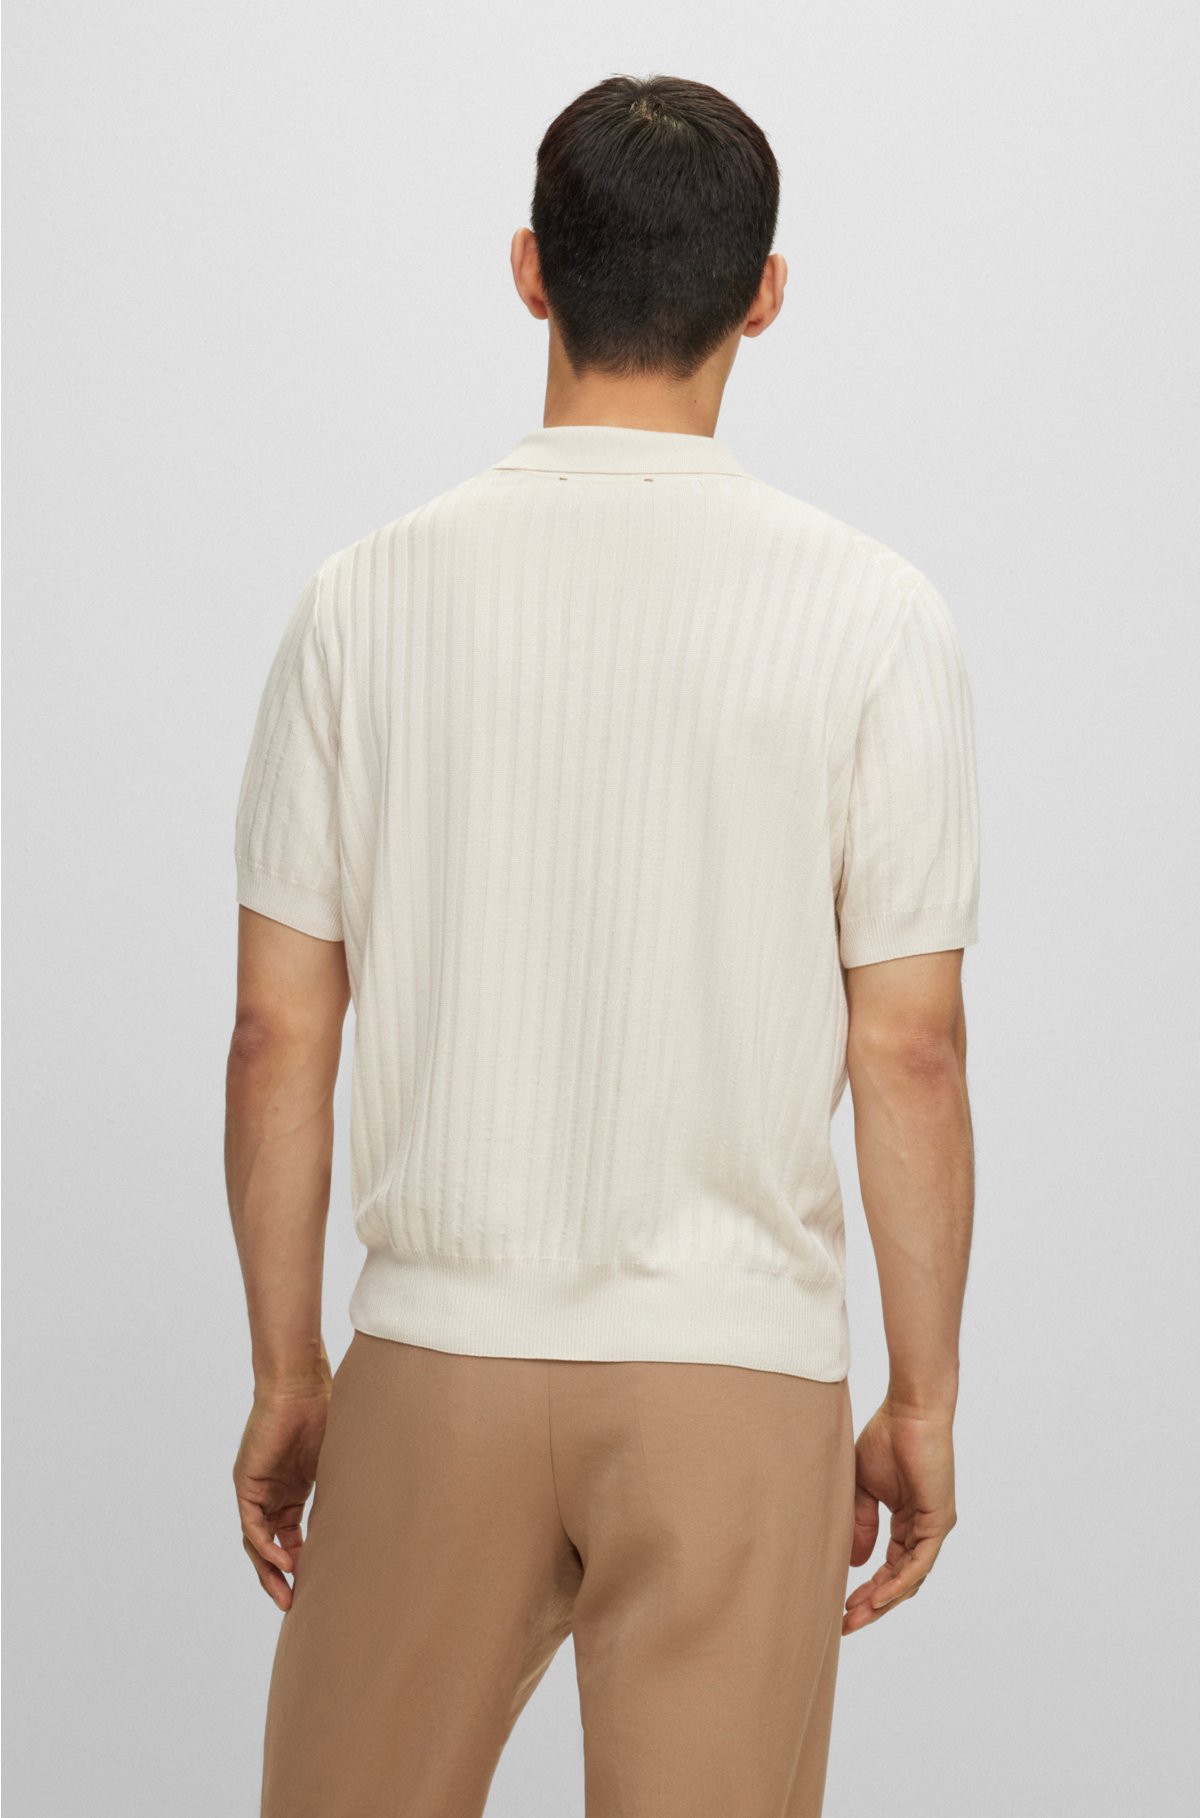 BOSS - Ribbed sweater in metallised fabric with mock neckline